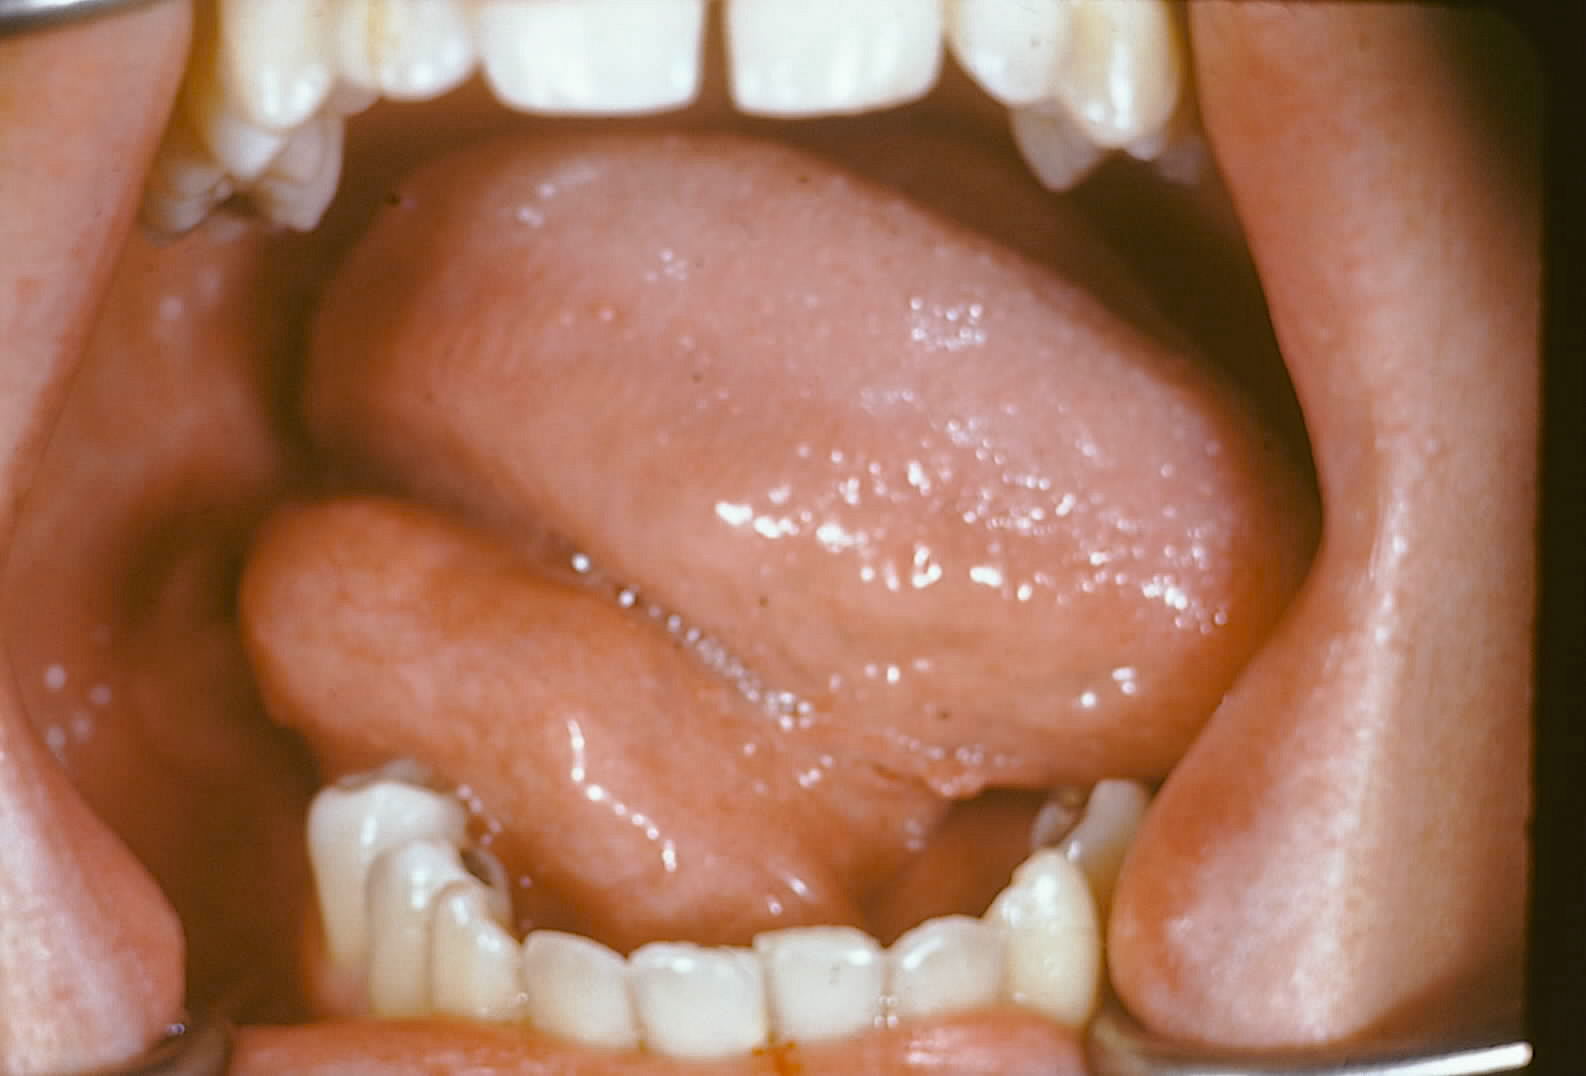 Epidermoid cyst on lateral tongue